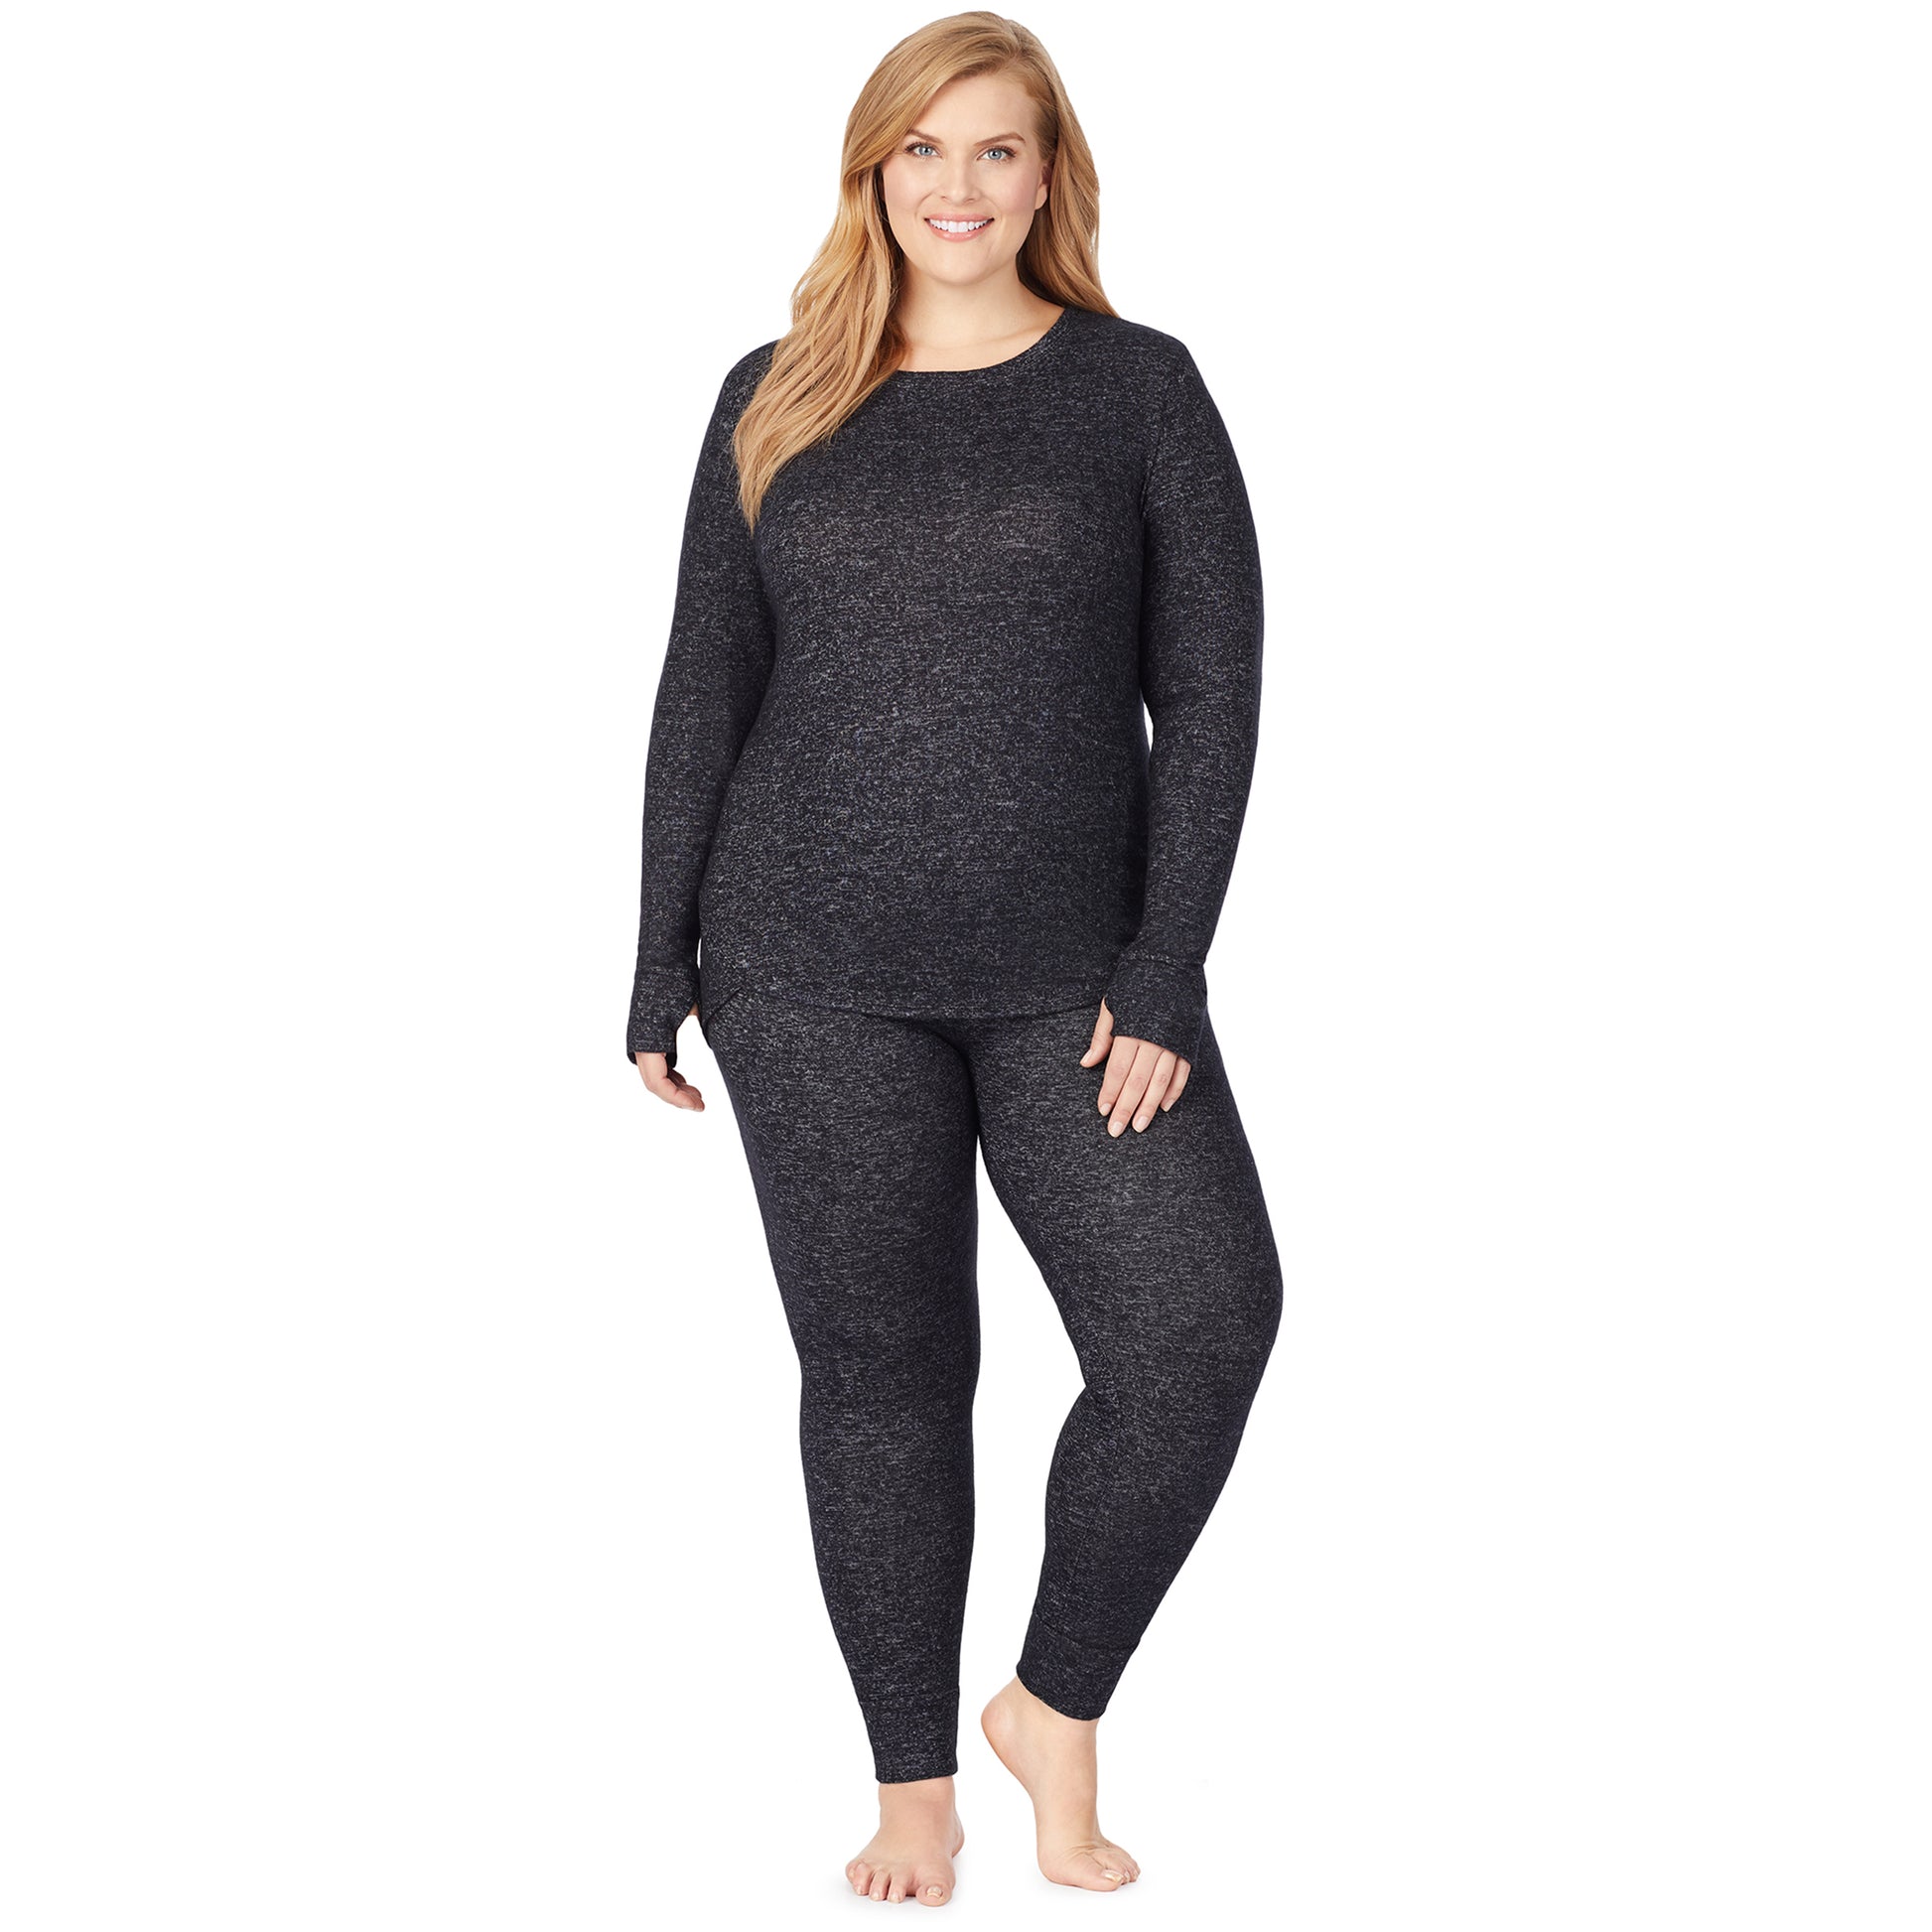 Marled Dark Charcoal; Model is wearing size 1X. She is 5'9", Bust 38", Waist 36", Hips 48.5". @A lady wearing a marled dark charcoal legging plus.